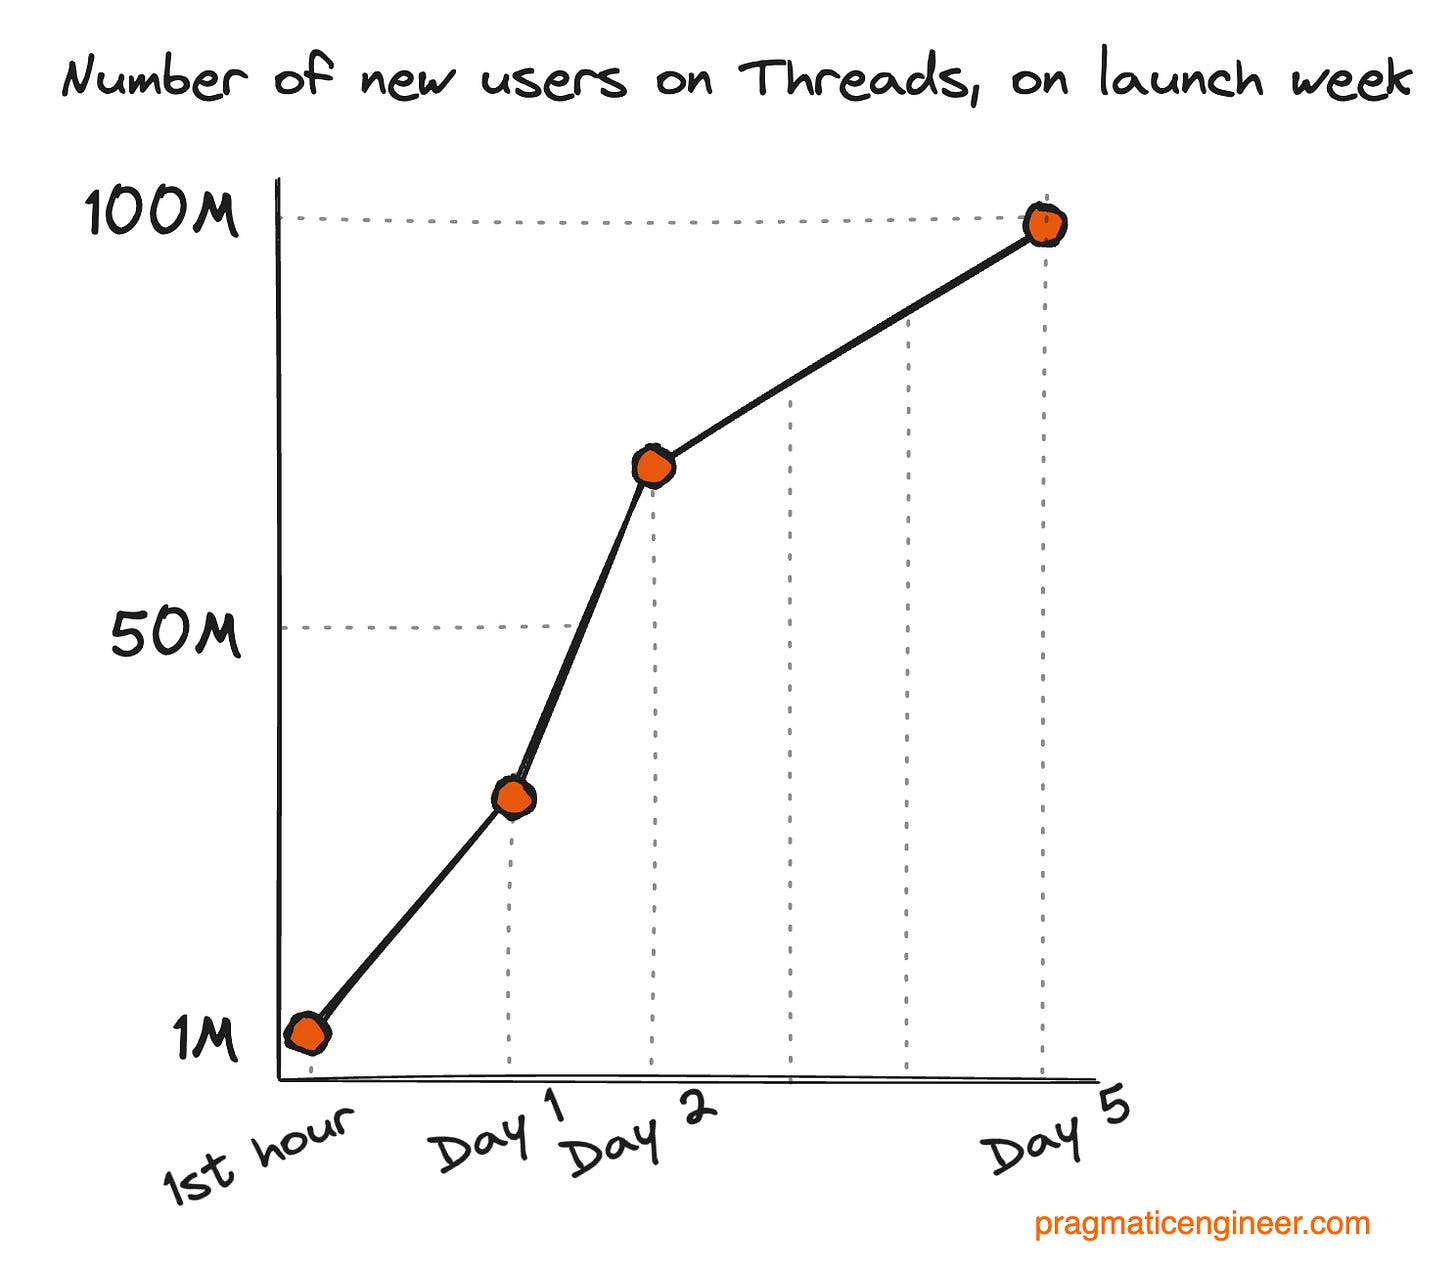 The growth of the Threads app in the first week. As Threads was mobile-app-only on launch, this number also equates to the number of app installs